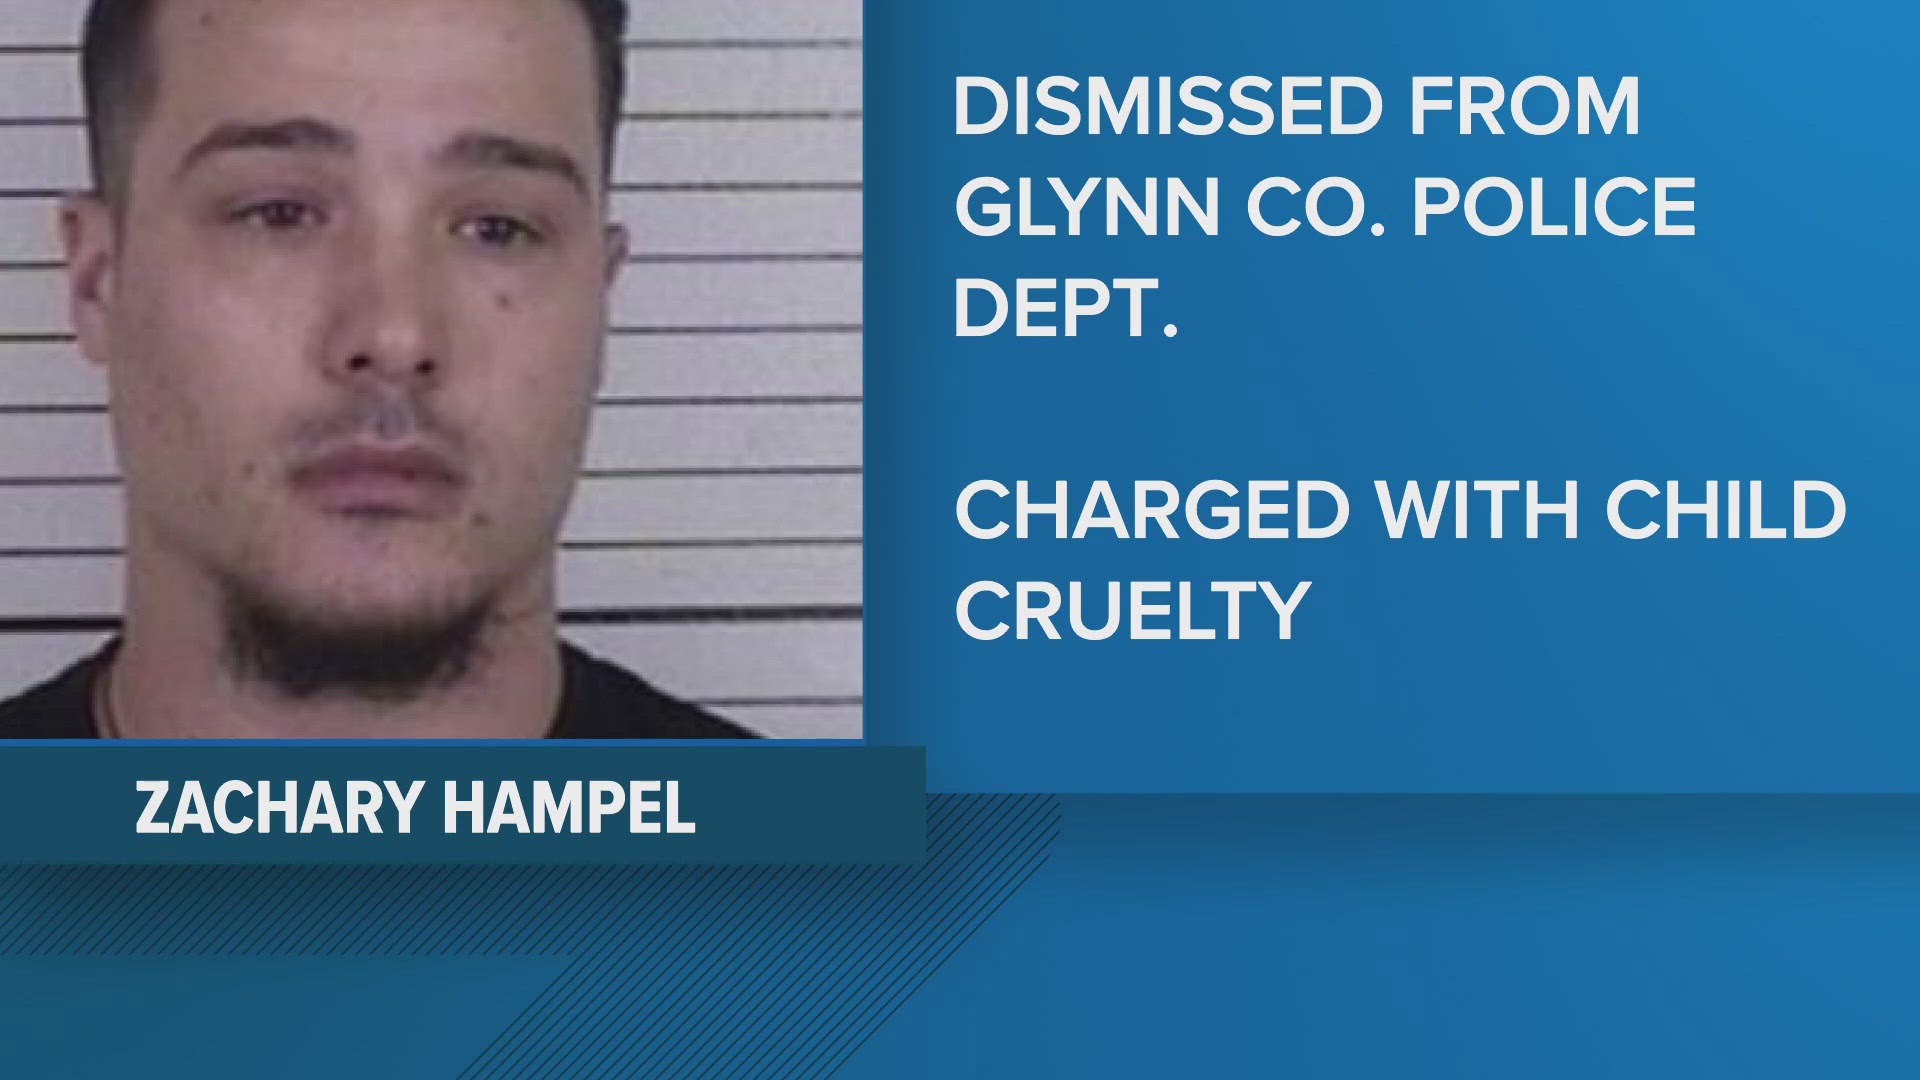 Police were called to Zachary Hampel's house after reports of a man barricaded with a gun. After a standoff, officers who knew Hampel hugged and comforted him.